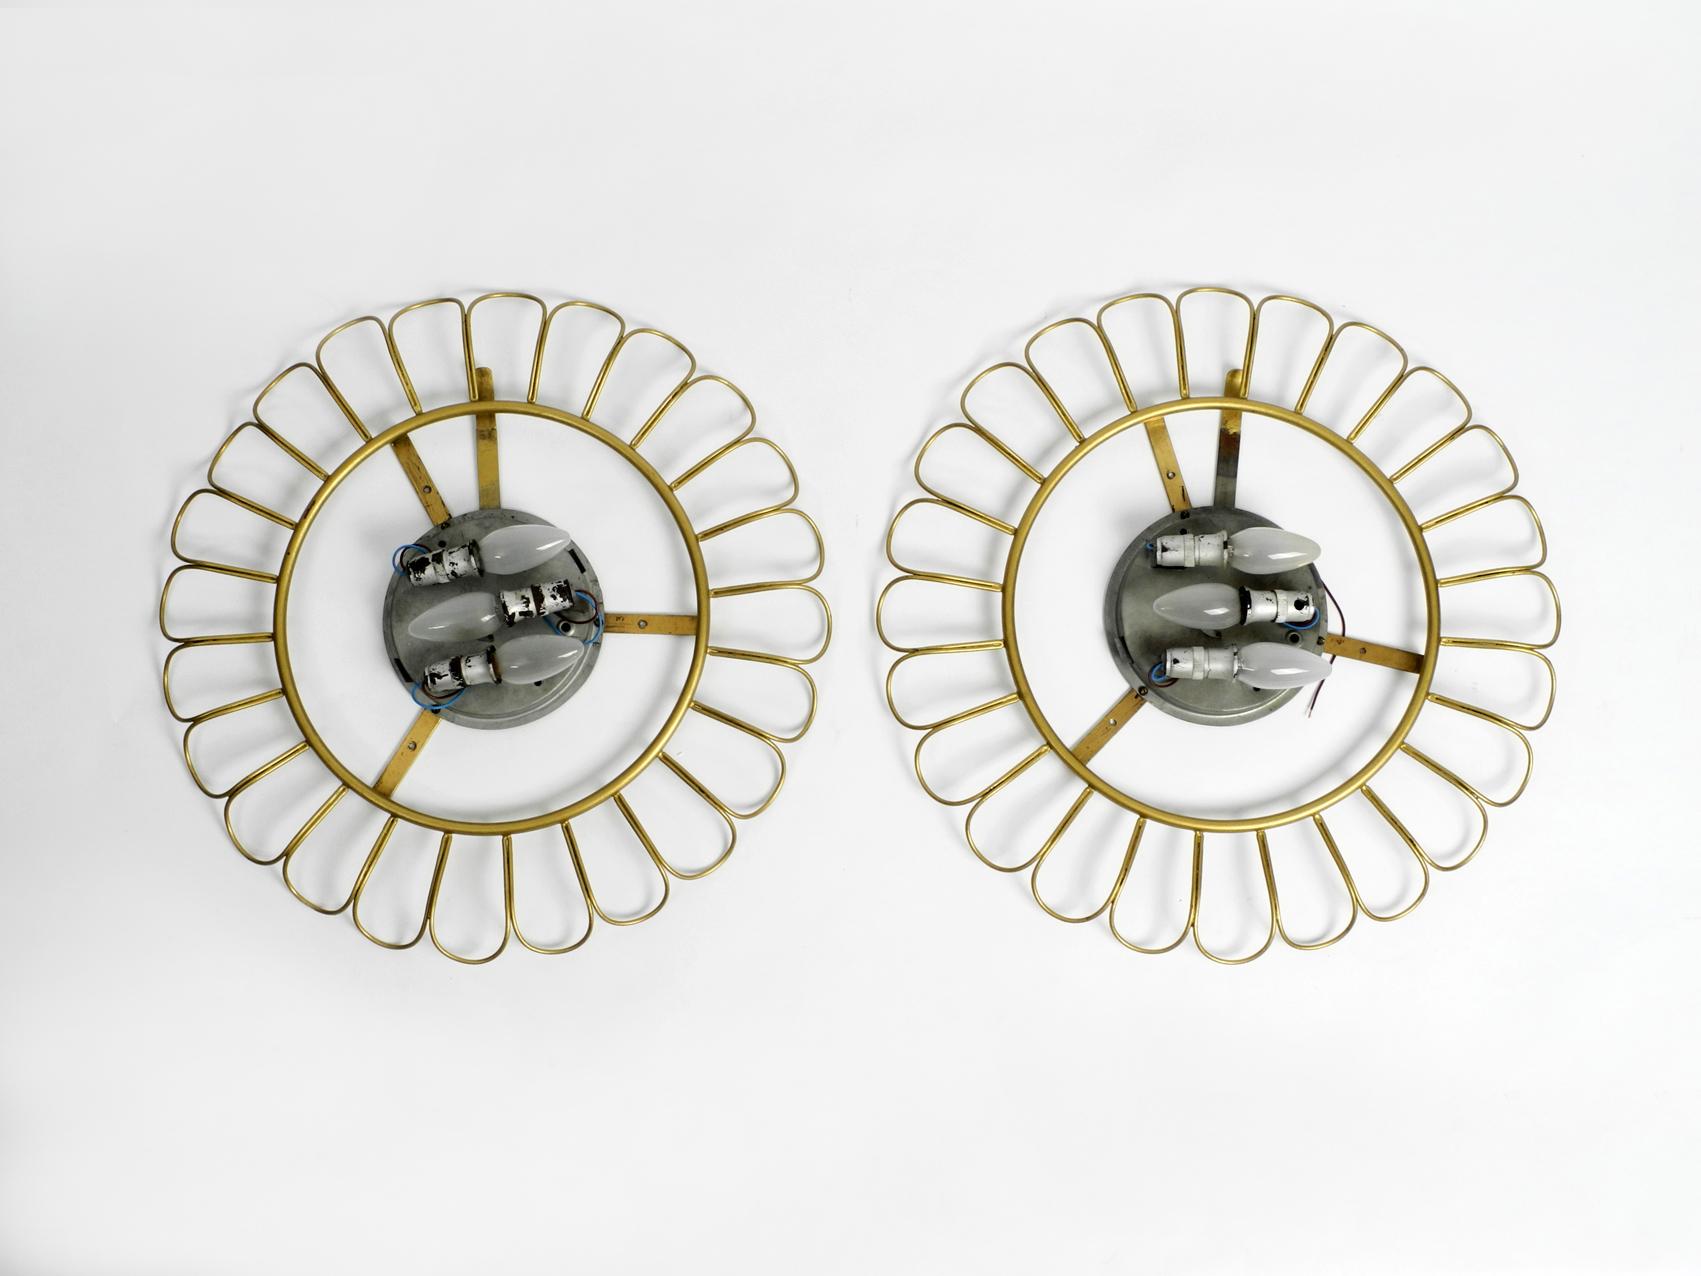 Pair of Rare Large Midcentury Sunburst Wall or Ceiling Lamps from Limburg 1